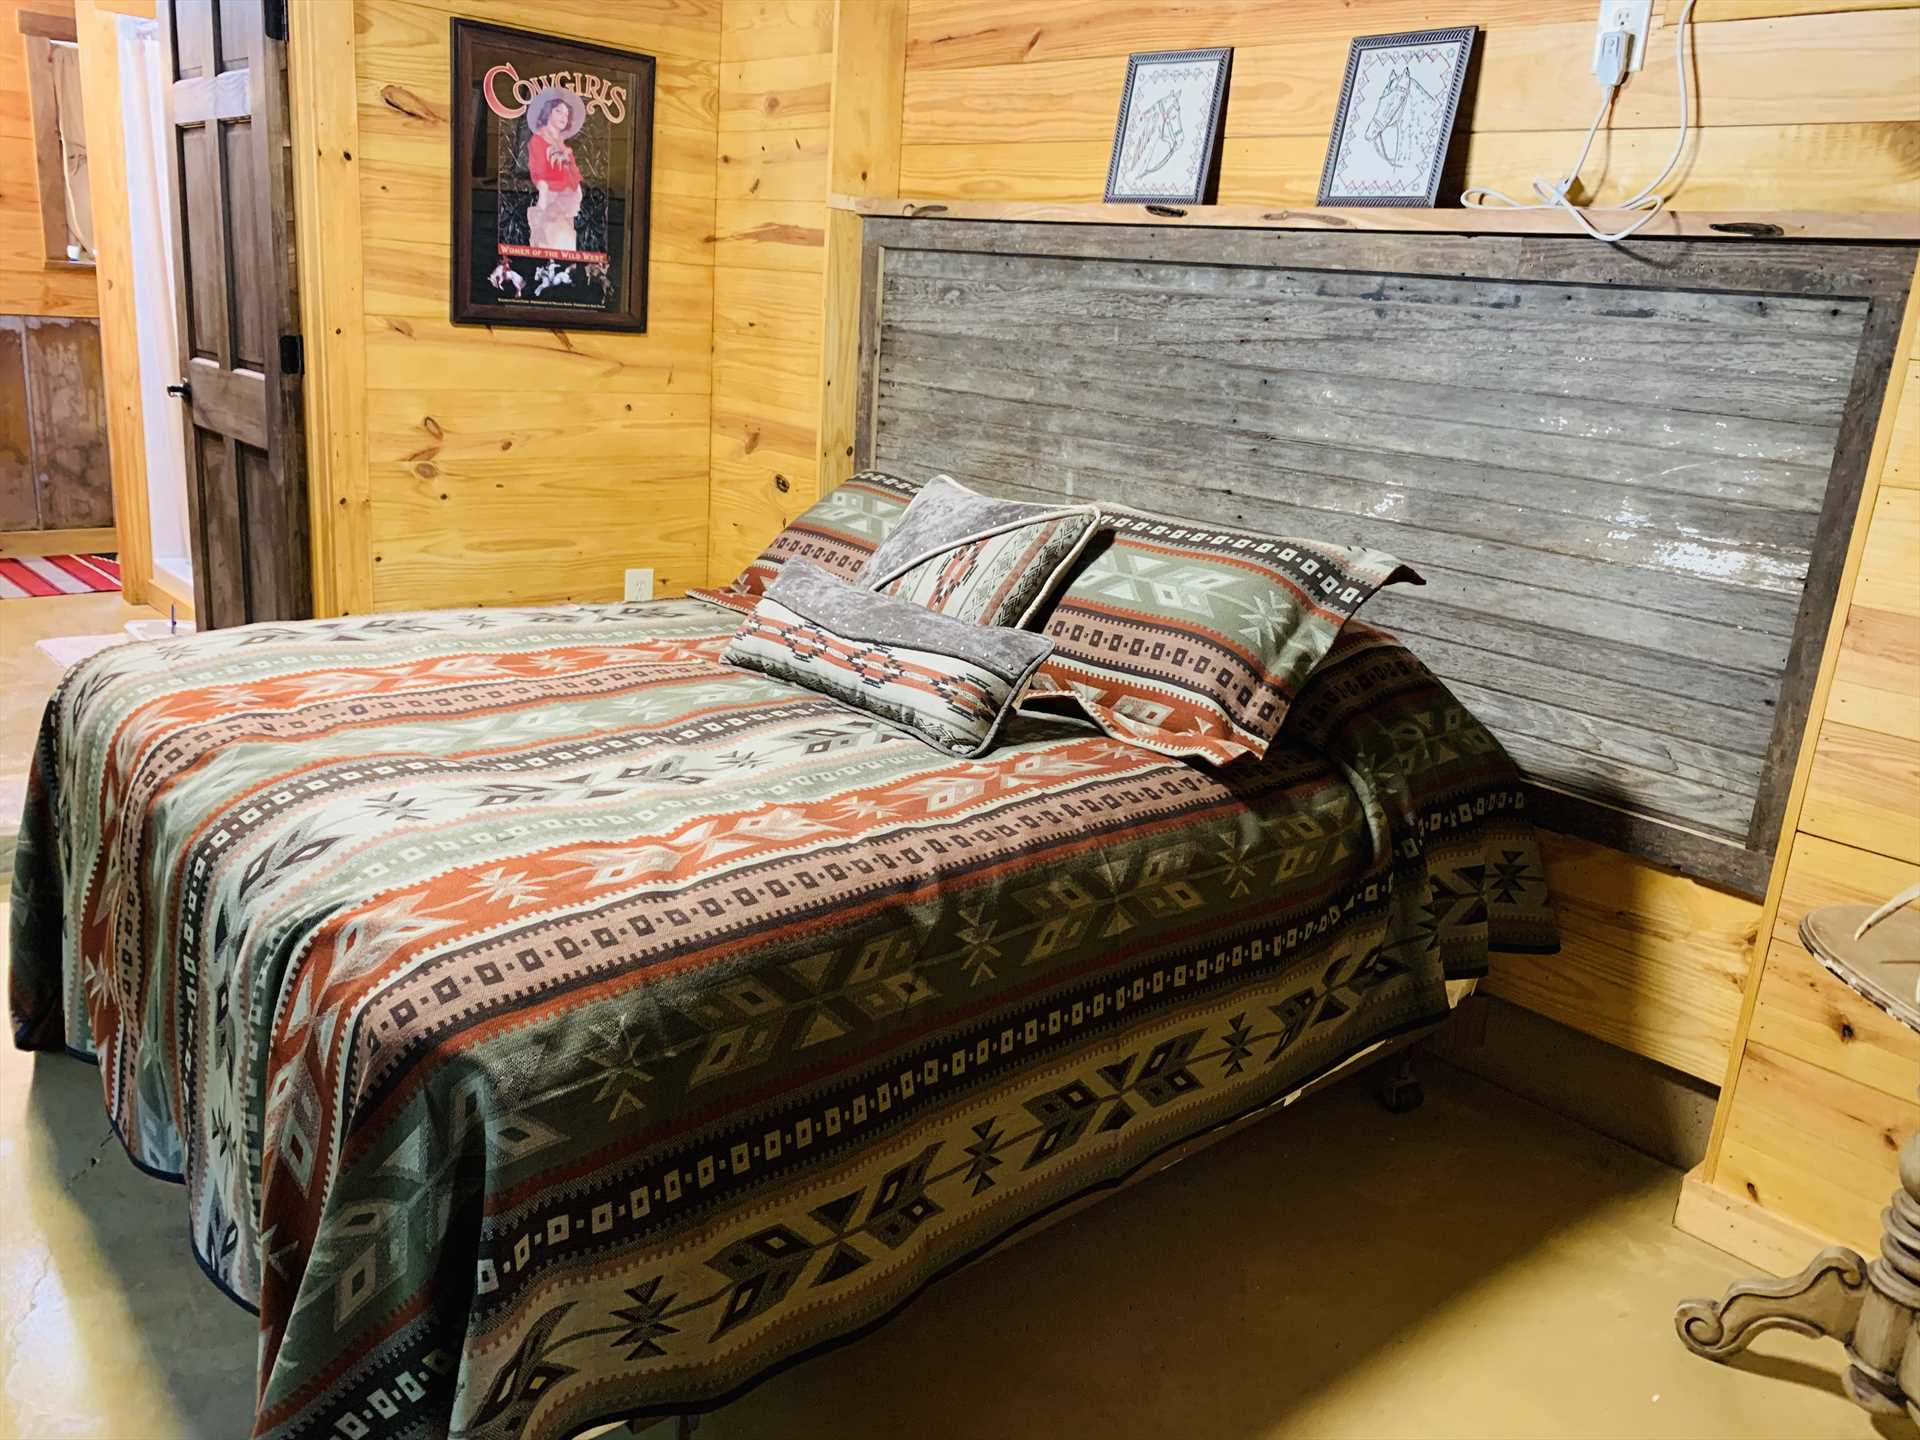                                                 The plush queen-sized bed comes with soft and comfy linens-and check out that barn board headboard!